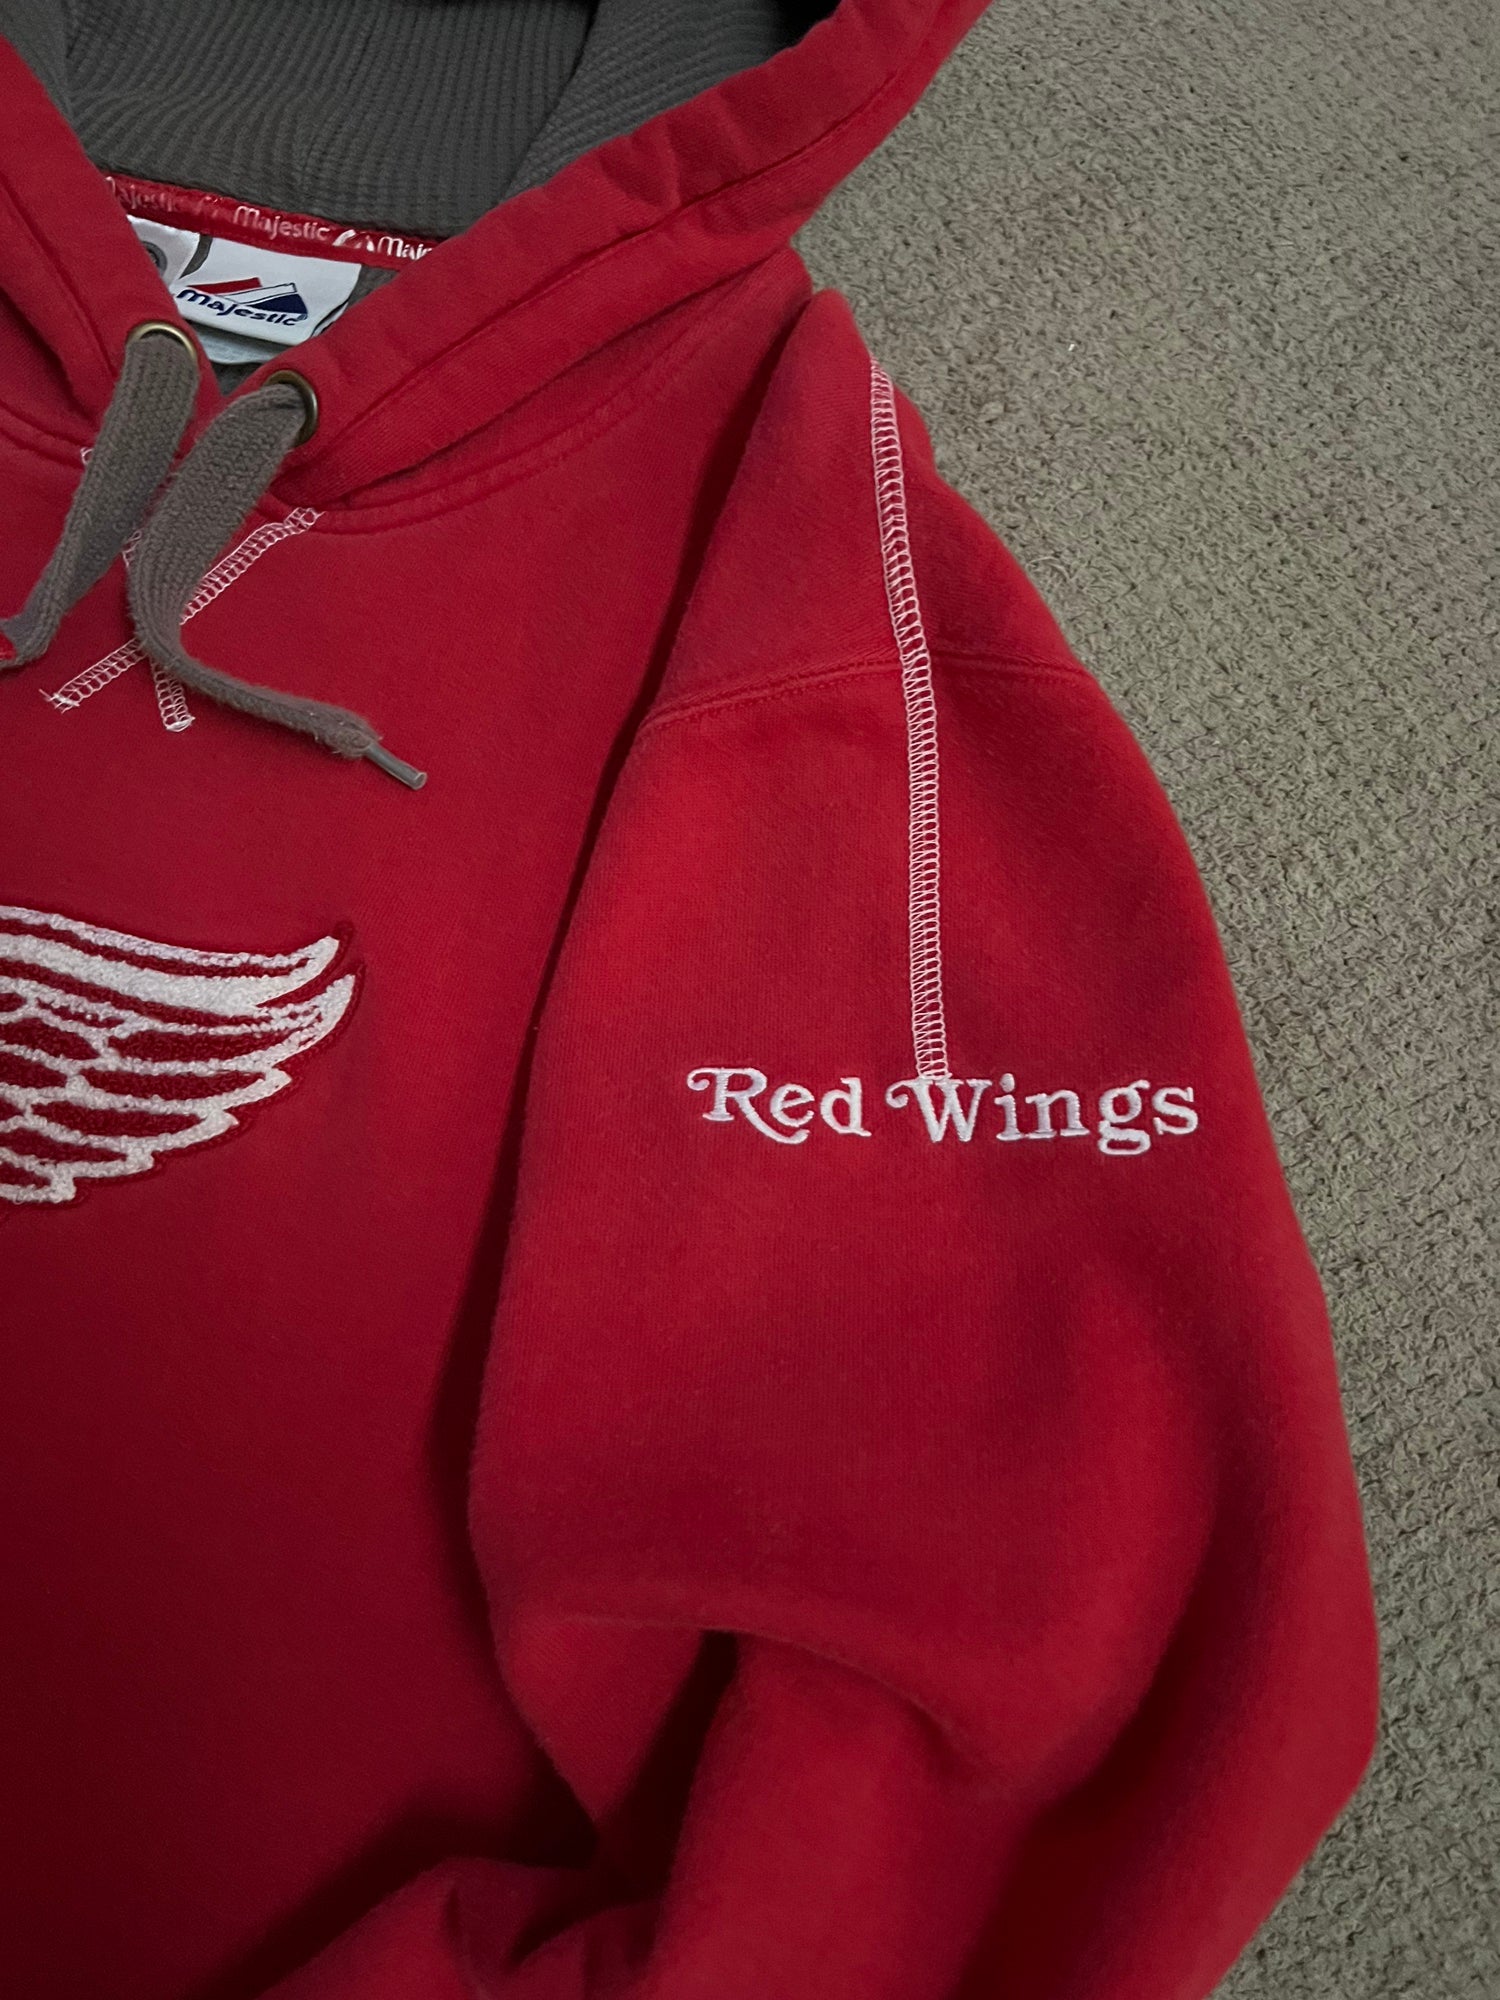 Detroit Red Wings Hoodie Size Large 42/44 Sweatshirt Jersey Style Lace Up  New